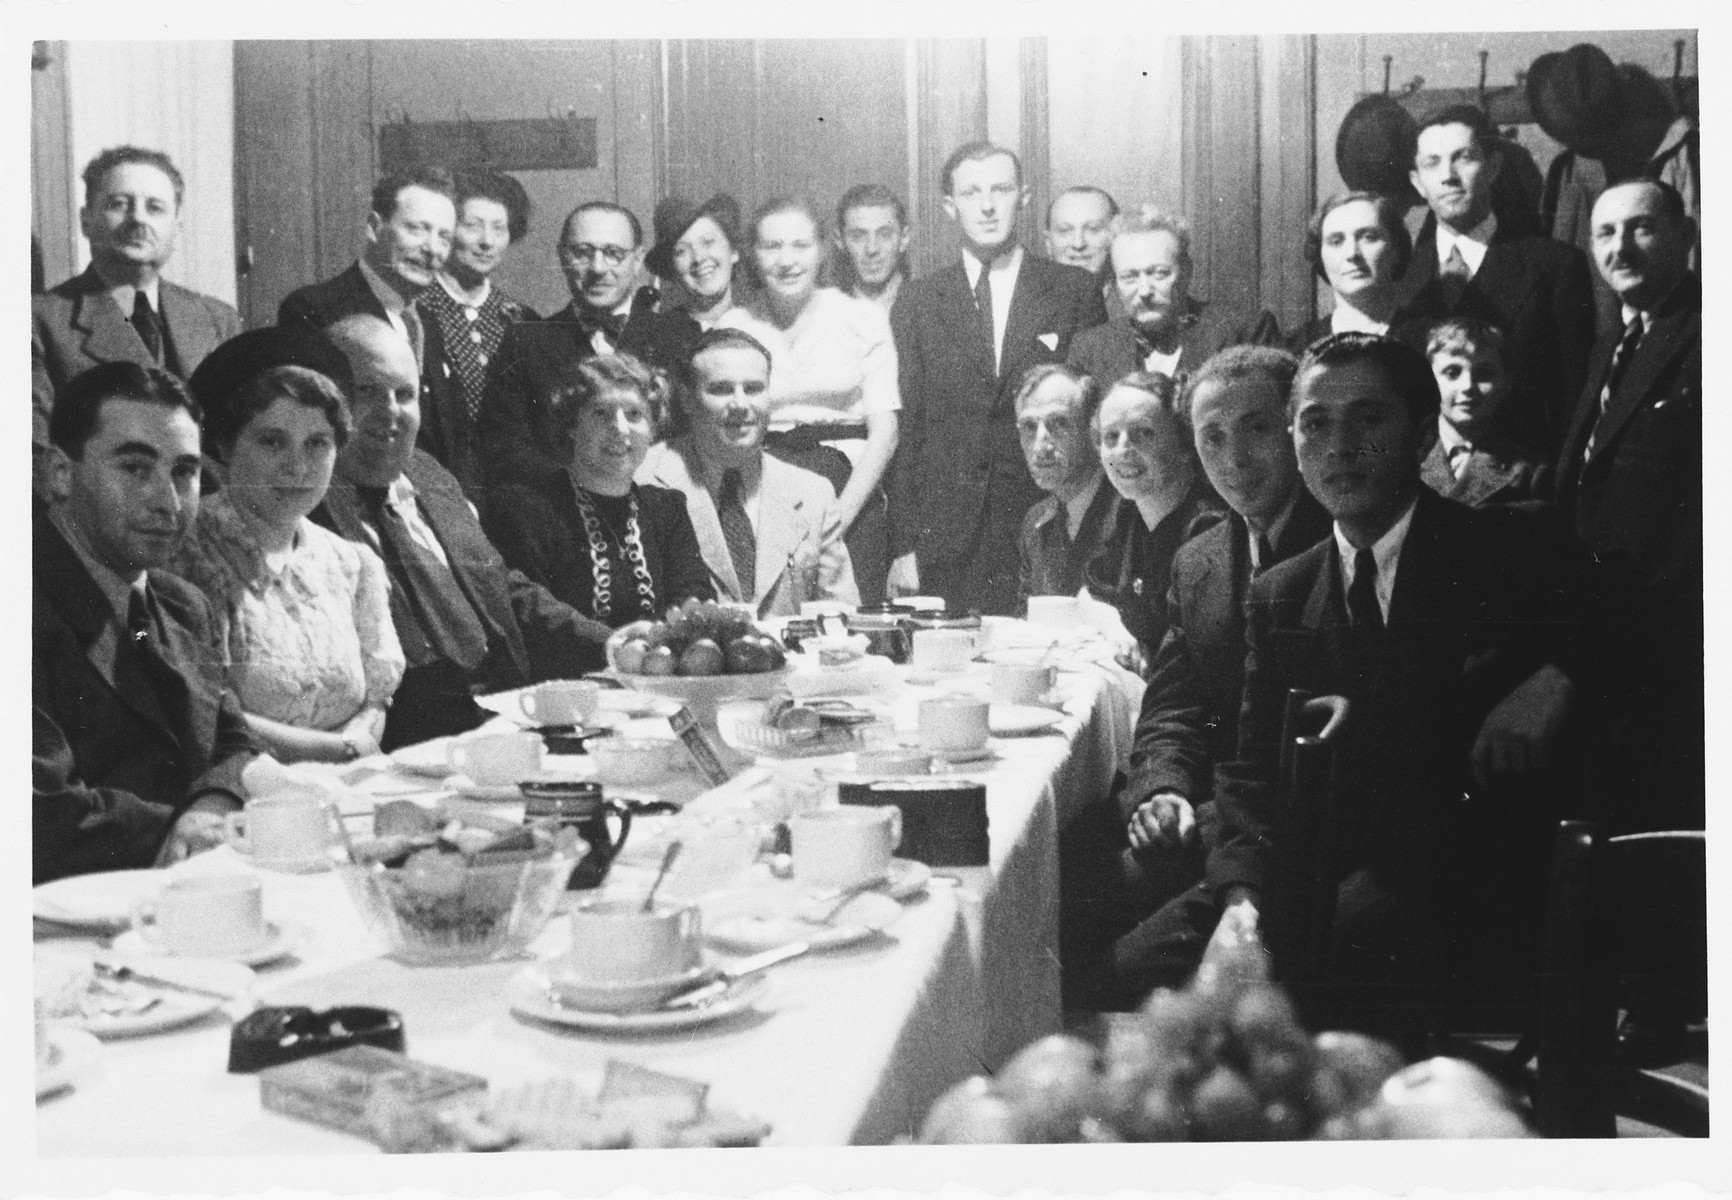 Members of the Luxembourg Jewish community pose with Jewish refugees from the Third Reich around a long dining table at a gathering sponsored by the ESRA Jewish social welfare organization.